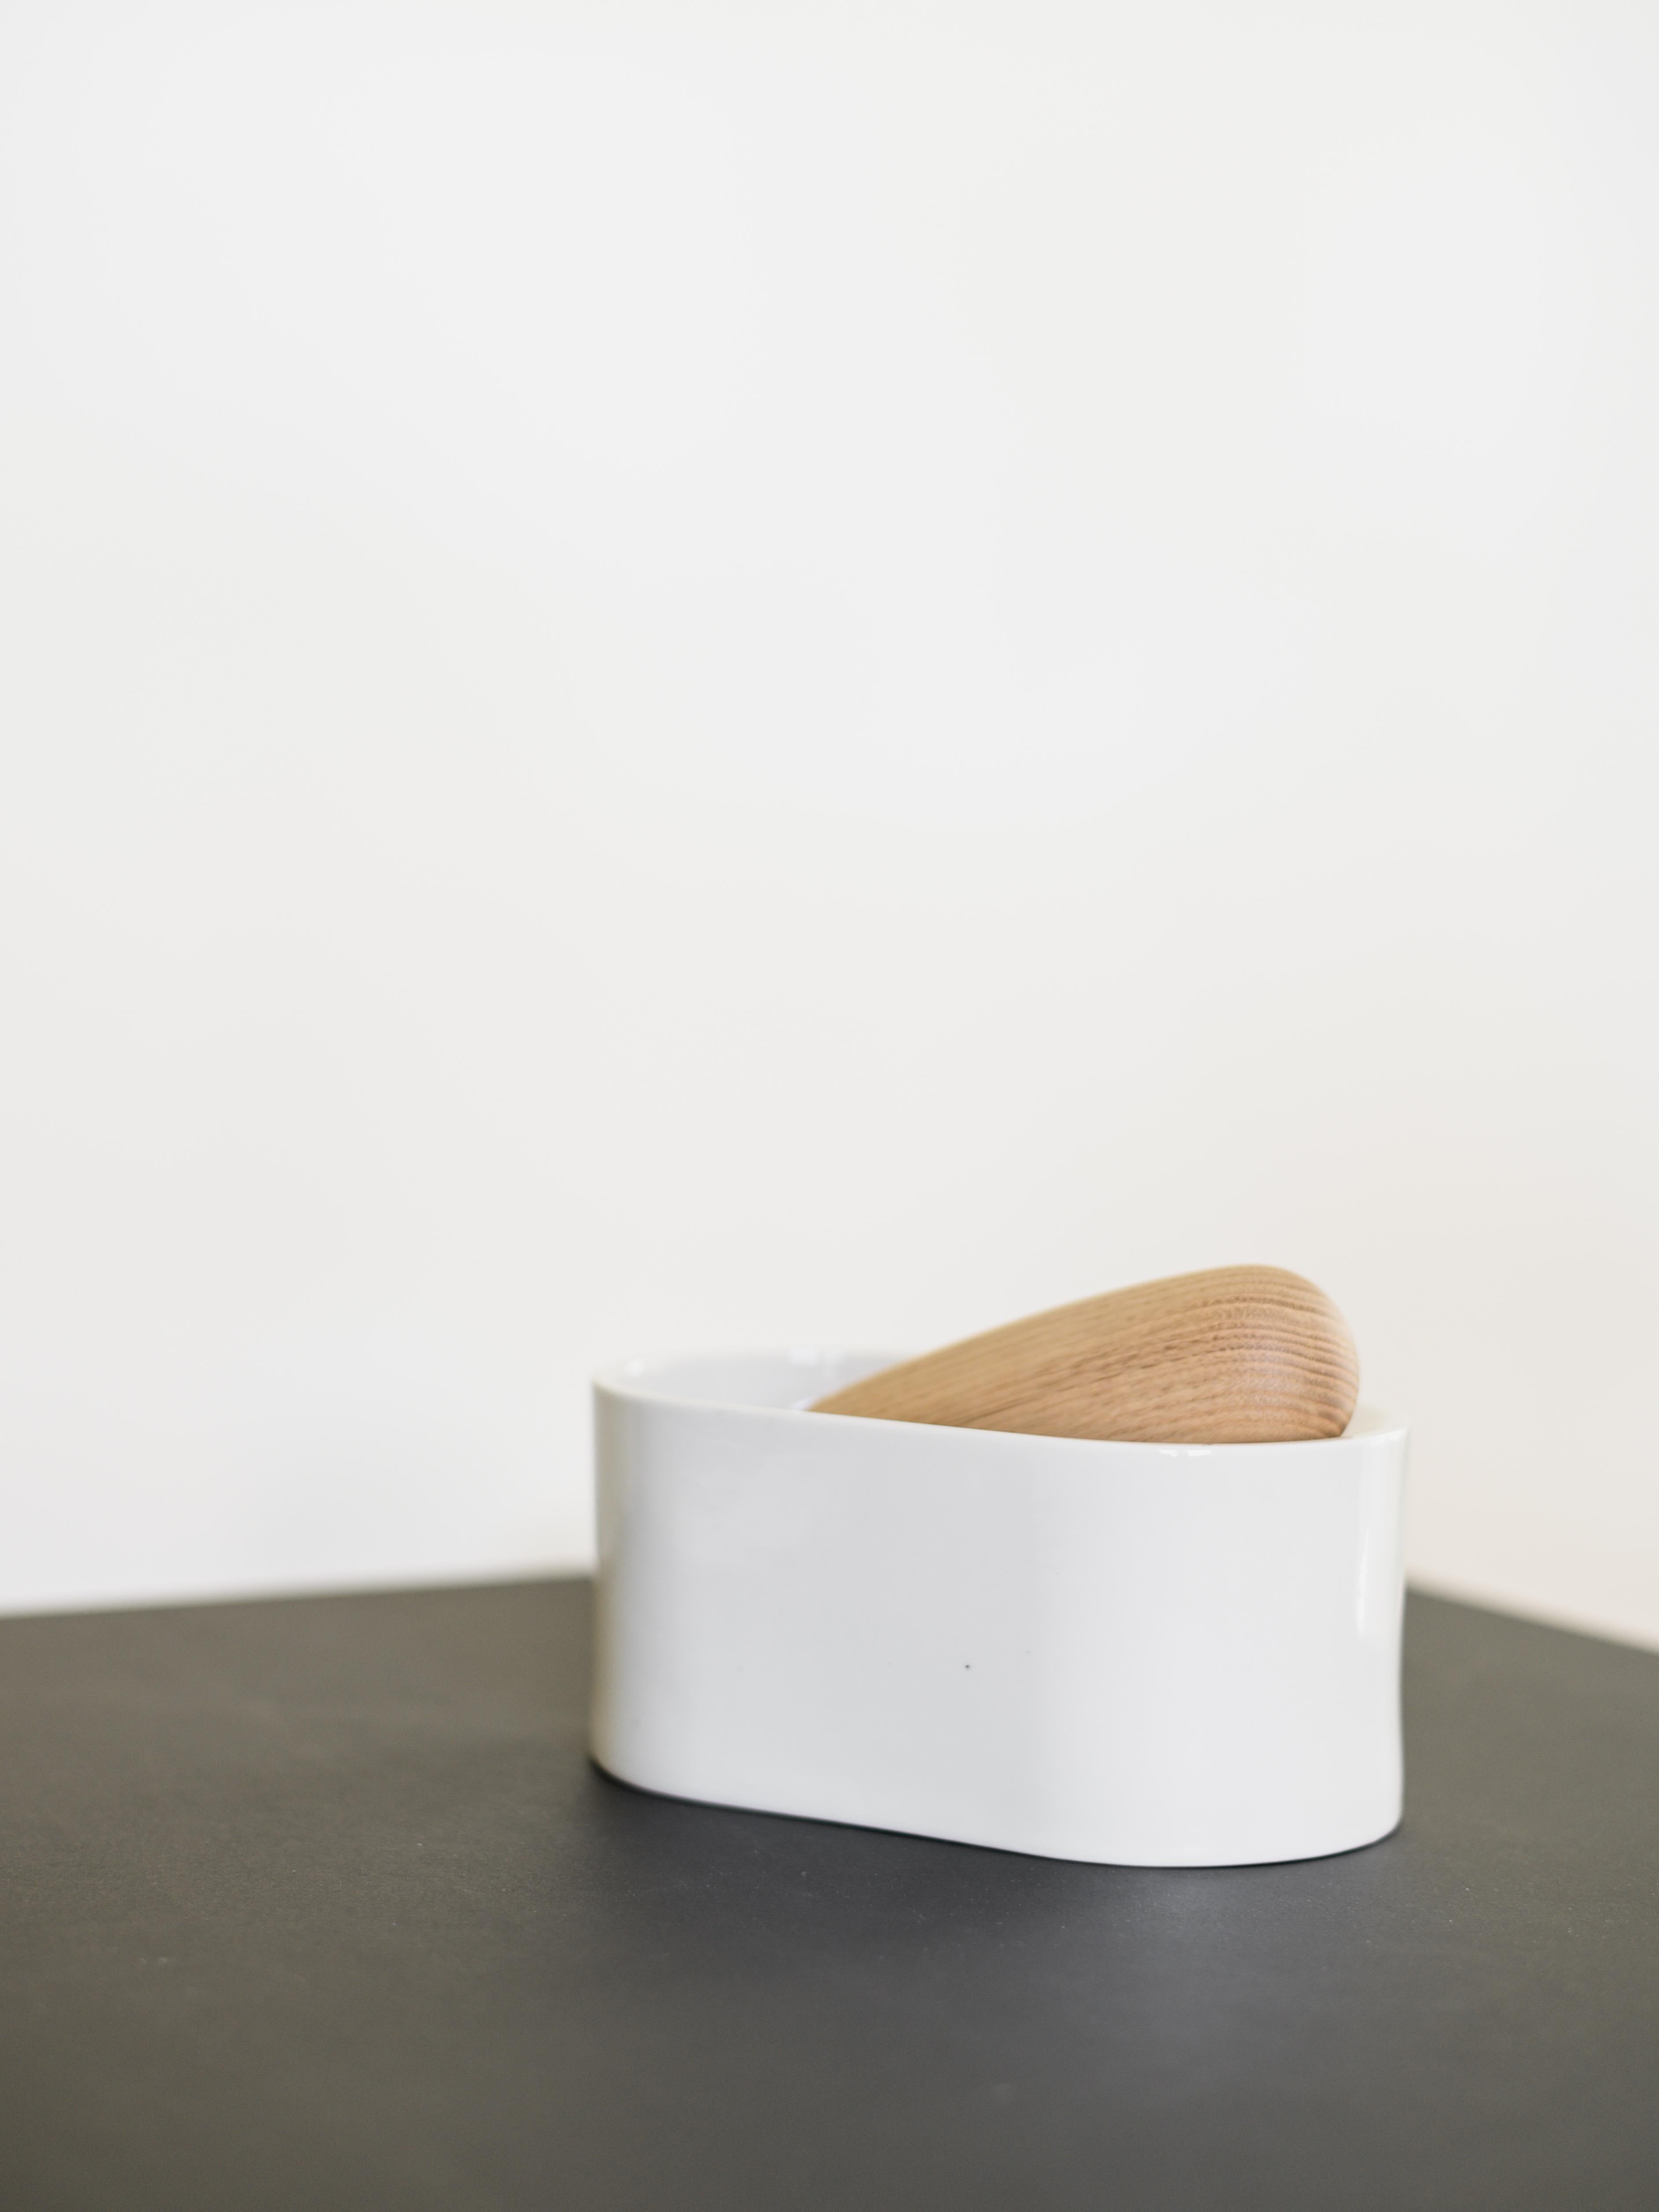 Organic Modern White Porcelain Moer Mortar and Pestle Handcrafted in Portugal by Origin Made For Sale